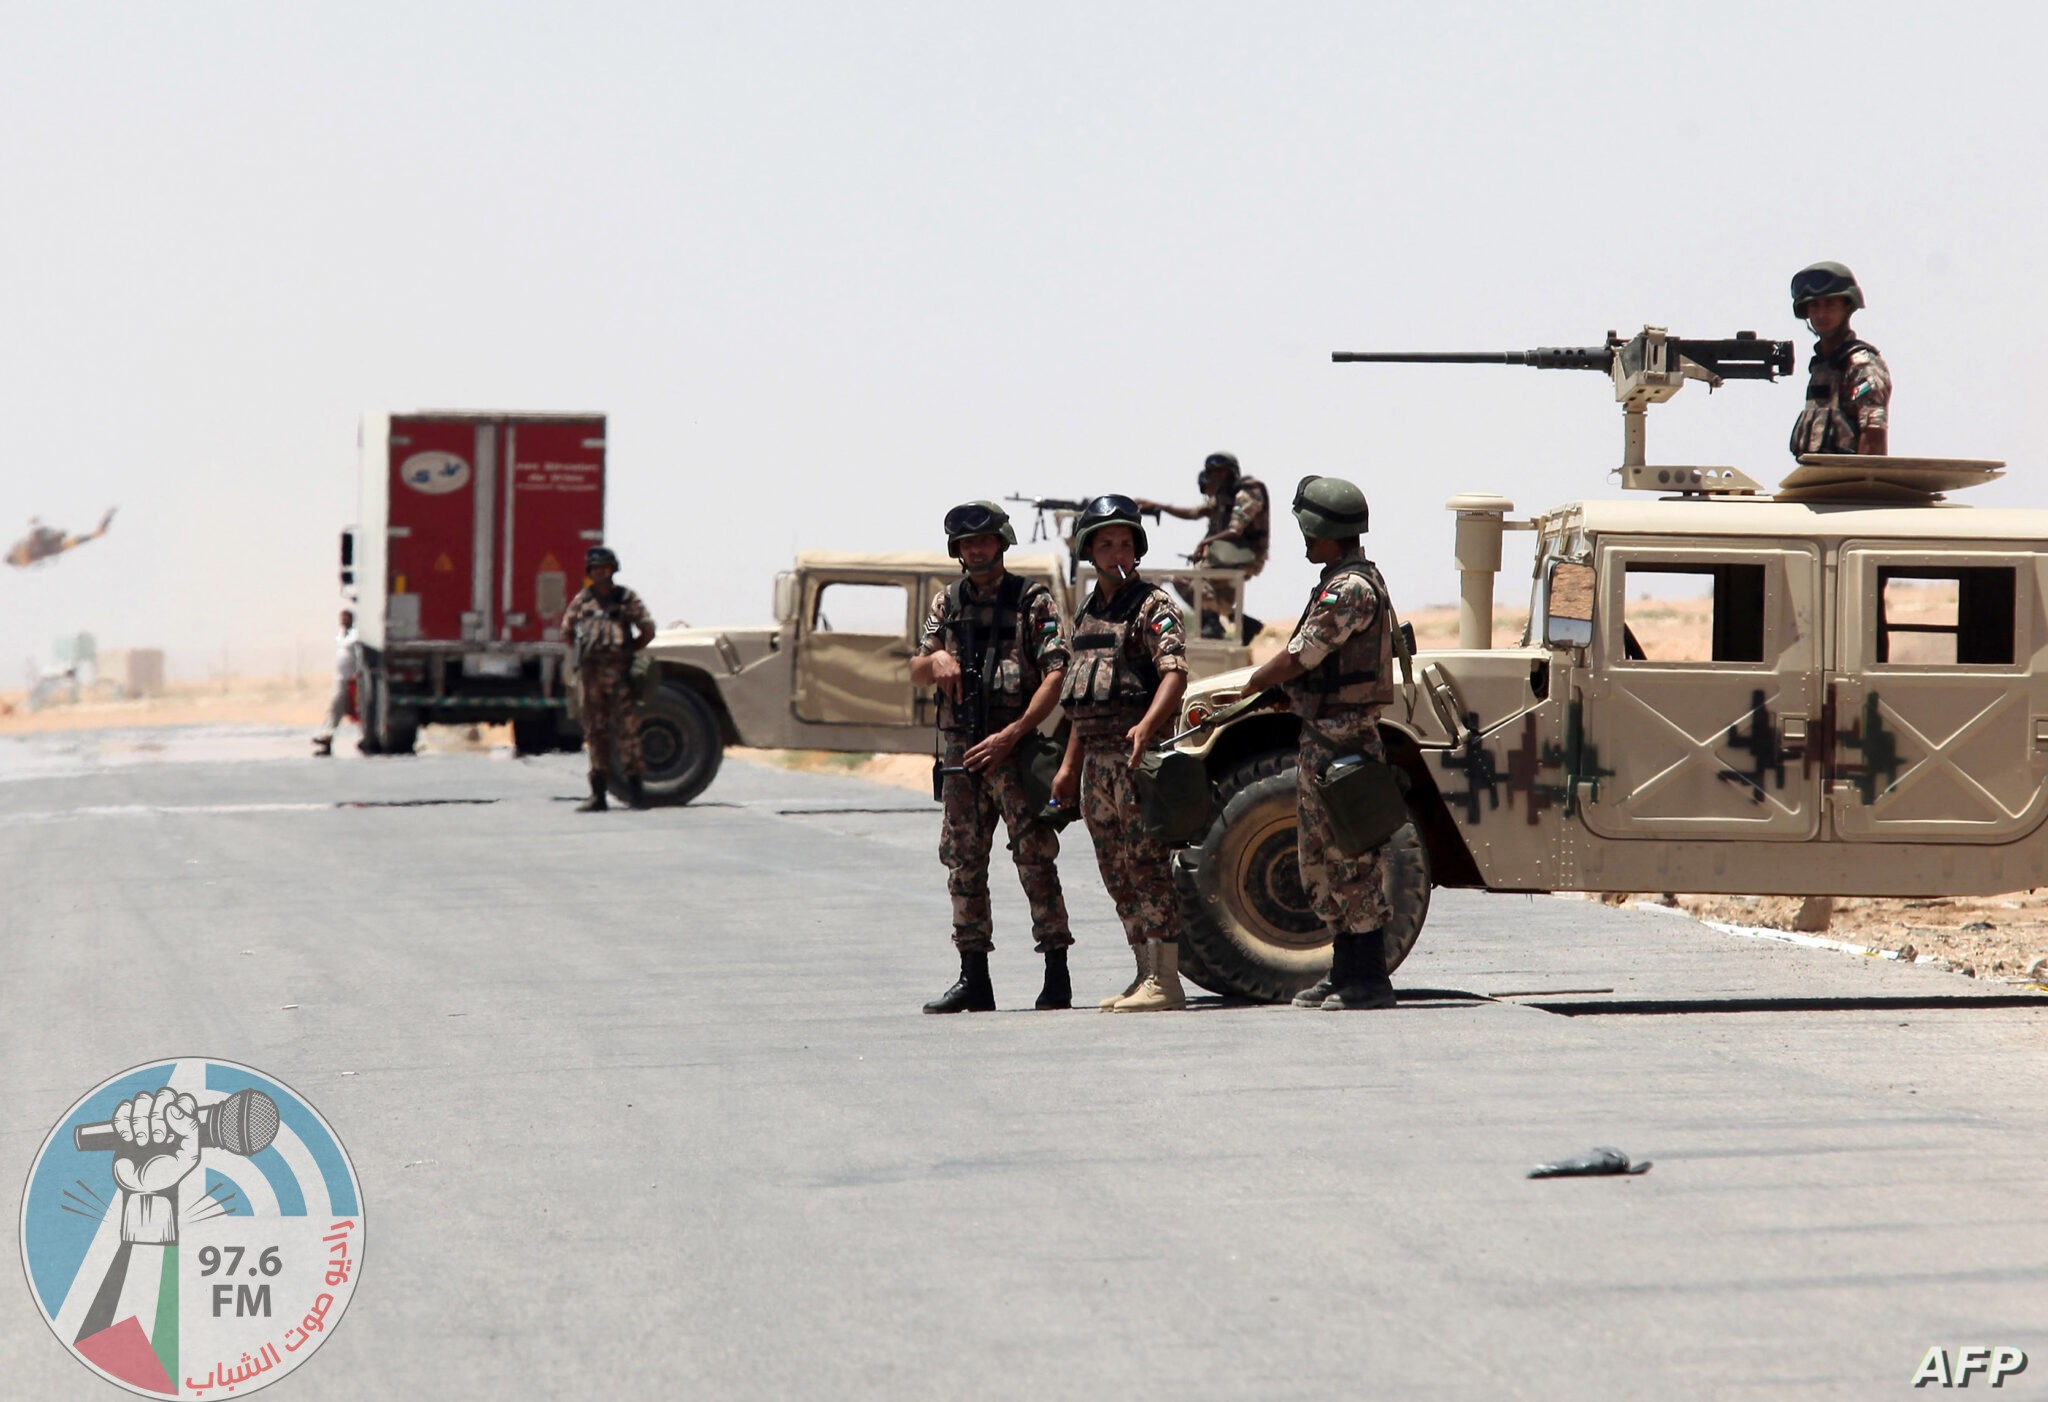 Jordanian soldiers stand guard near their military vehicles at the Al-Karameh border point with Iraq on June 25, 2014 as Jordan reinforced its border with Iraq after Sunni Arab militants overran a crossing with Syria. Sunni insurgents led by the jihadist Islamic State of Iraq and the Levant (ISIL) overran swathes of land north and west of Baghdad this month sparking fears in Amman that they will take the fight to Jordan, which is already struggling with its own home-grown Islamists. AFP PHOTO/STR